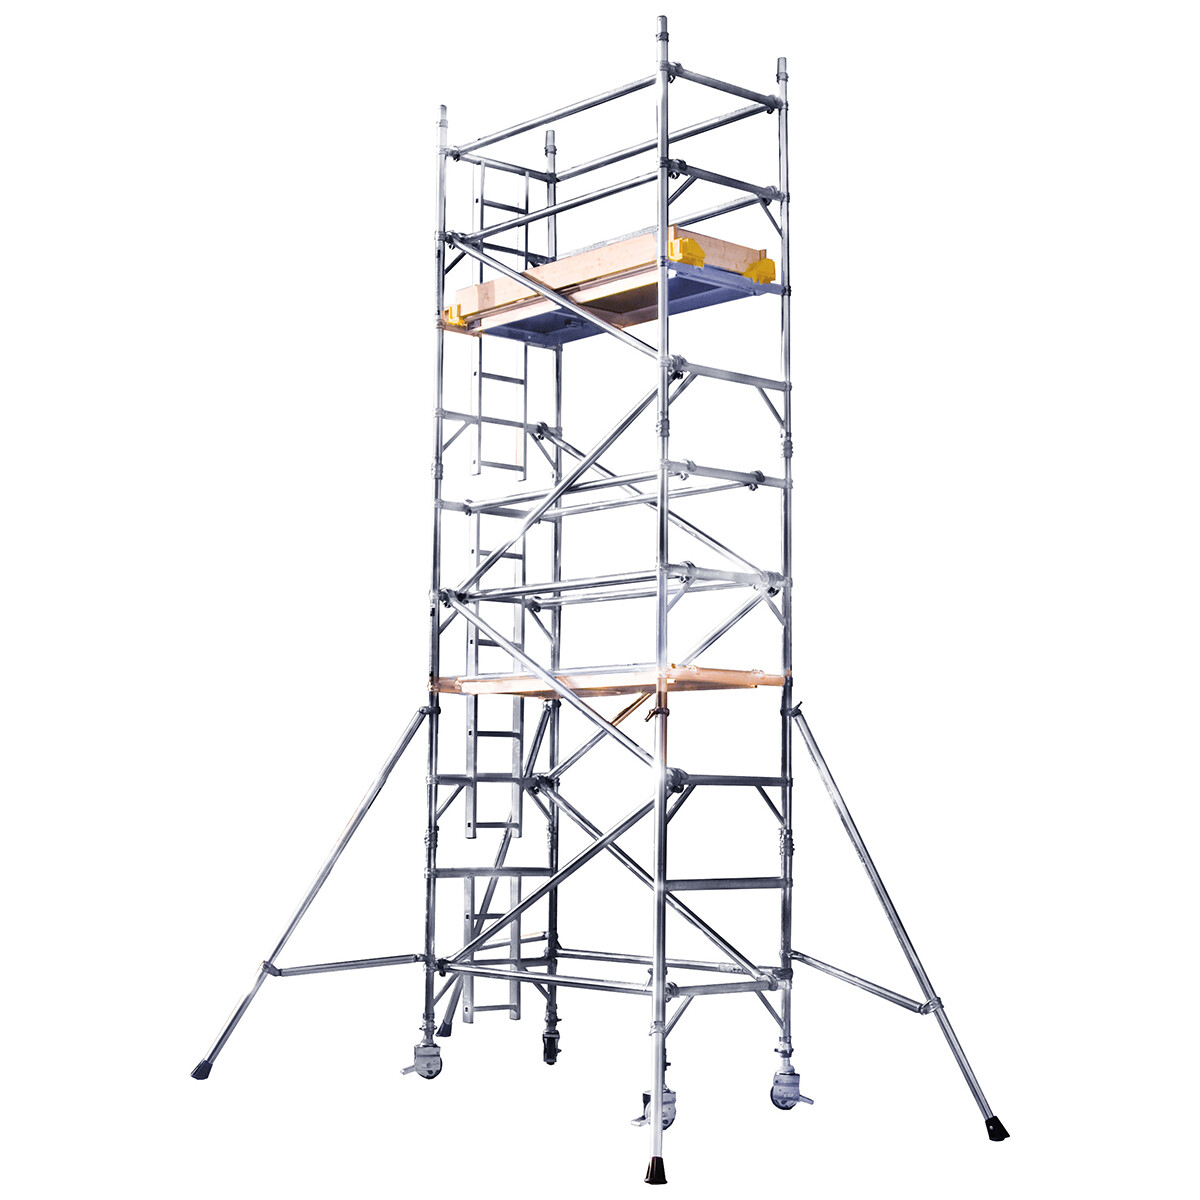 Narrow Span Mobile Tower - 0.85m wide x 2.3m high